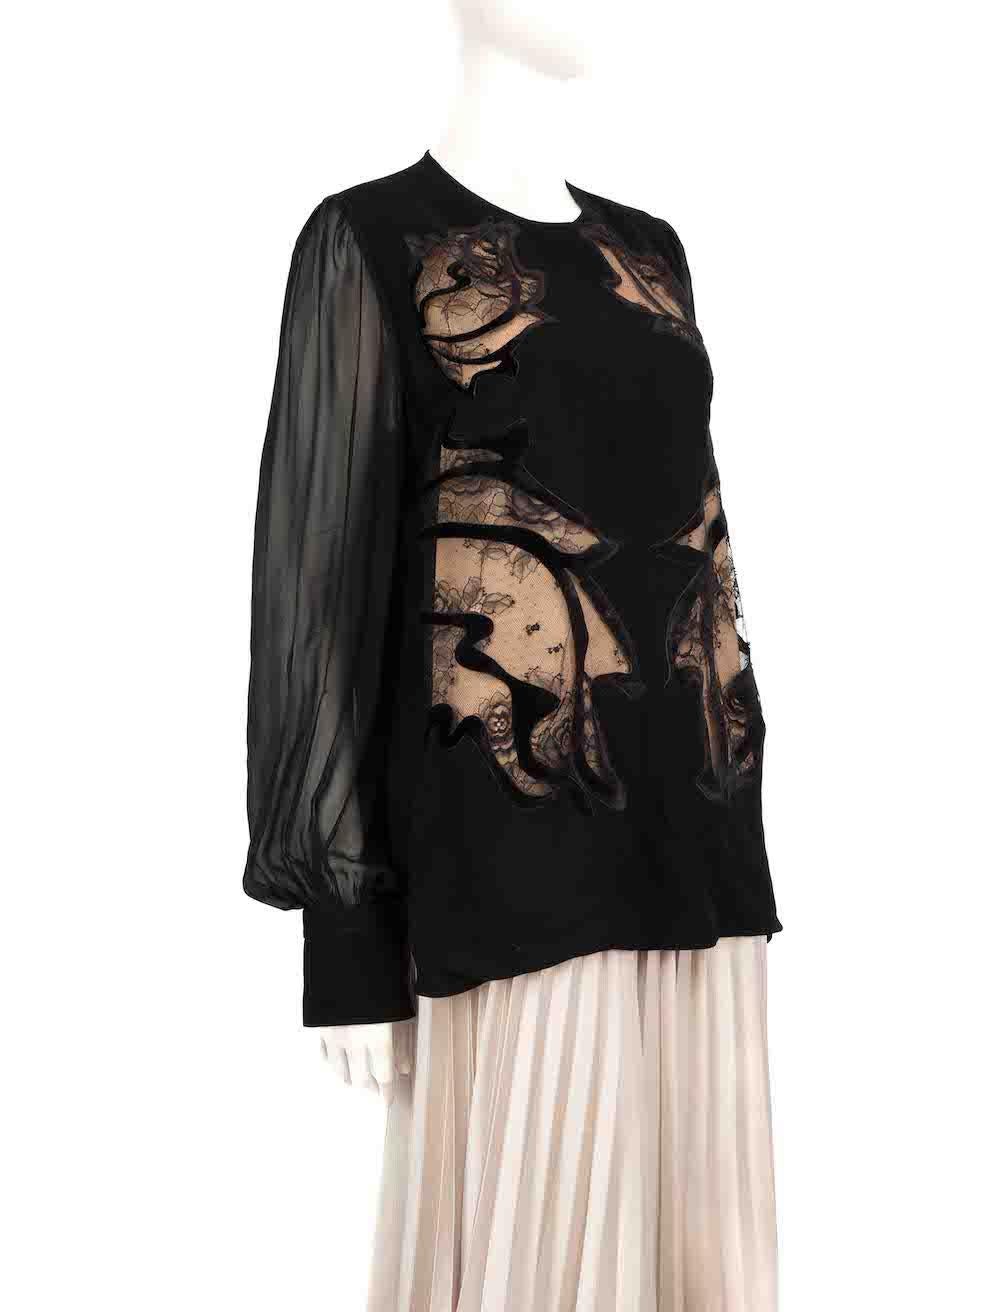 CONDITION is Very good. Hardly any visible wear to blouse is evident on this used Elie Saab designer resale item.
 
 
 
 Details
 
 
 Black
 
 Viscose
 
 Blouse
 
 Lace sheer panels
 
 Long sheer puff sleeves
 
 Buttoned cuffs
 
 Blouse is lined and